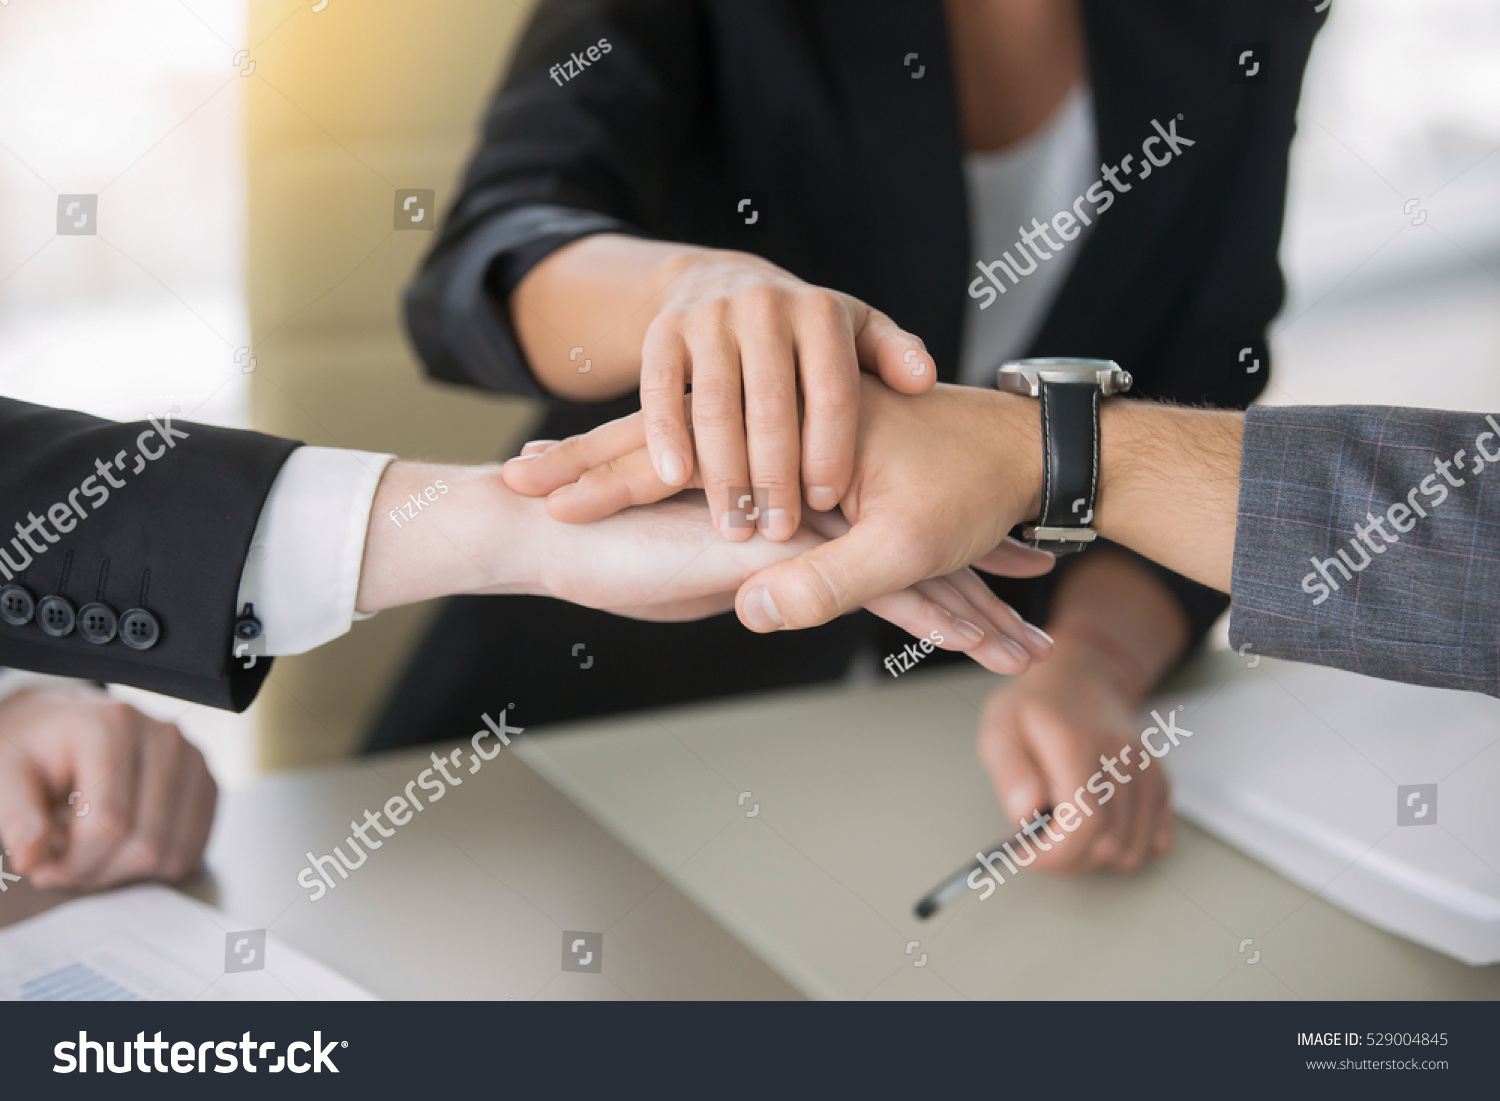 Close up of giving a high five, guarantee between potential partners, decide on marketing strategy for mutual business, profitable family business idea, running a business together. Teamwork concept #529004845